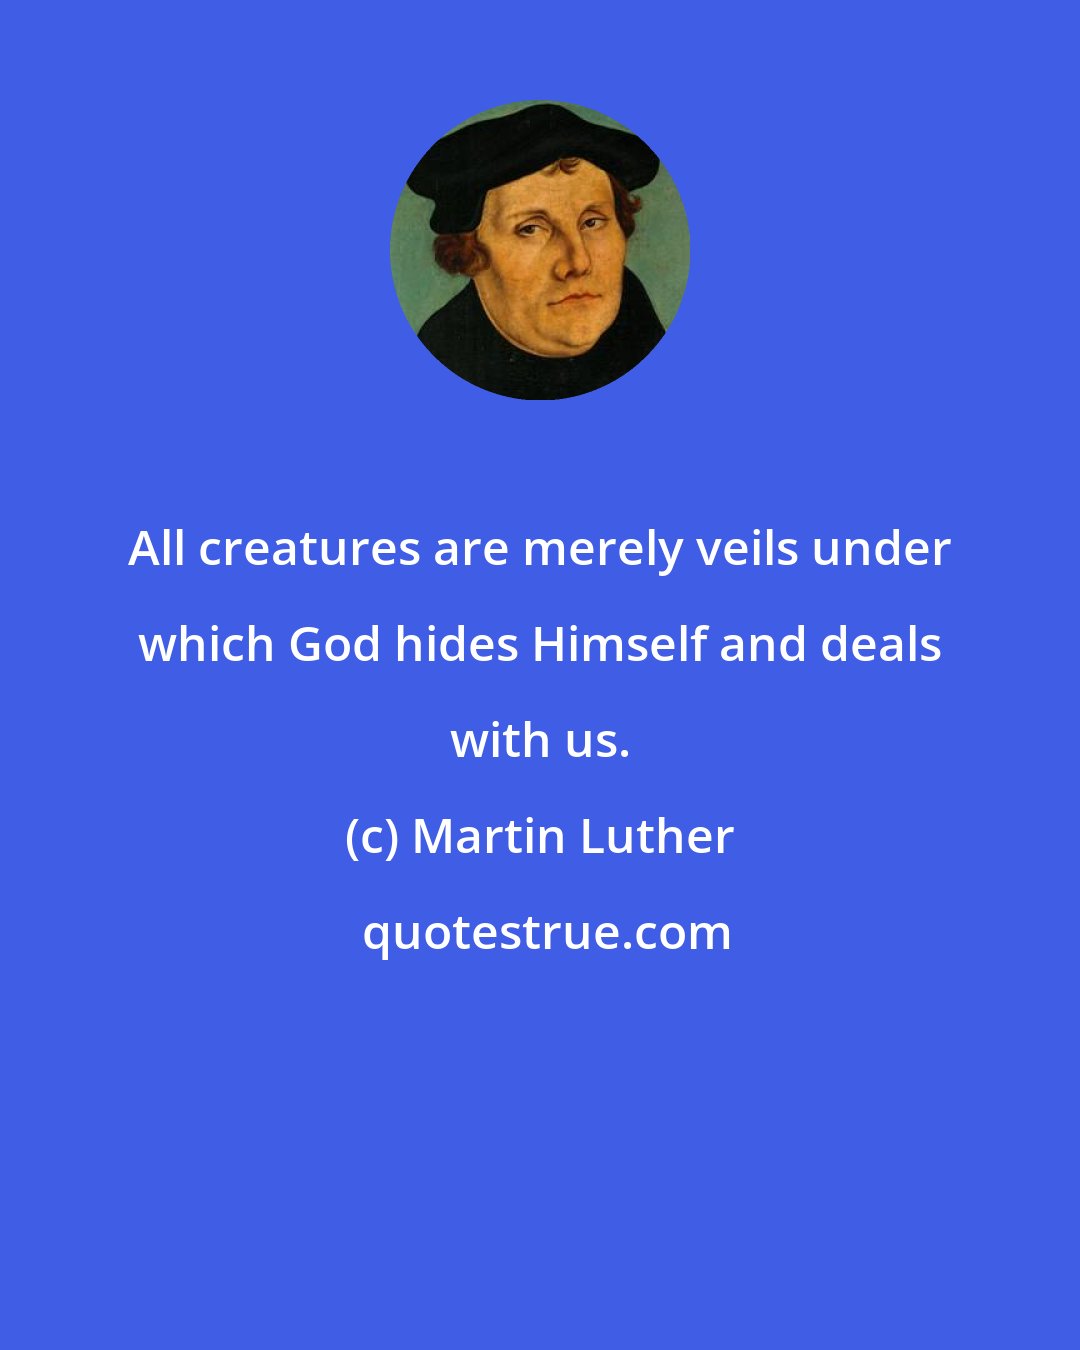 Martin Luther: All creatures are merely veils under which God hides Himself and deals with us.